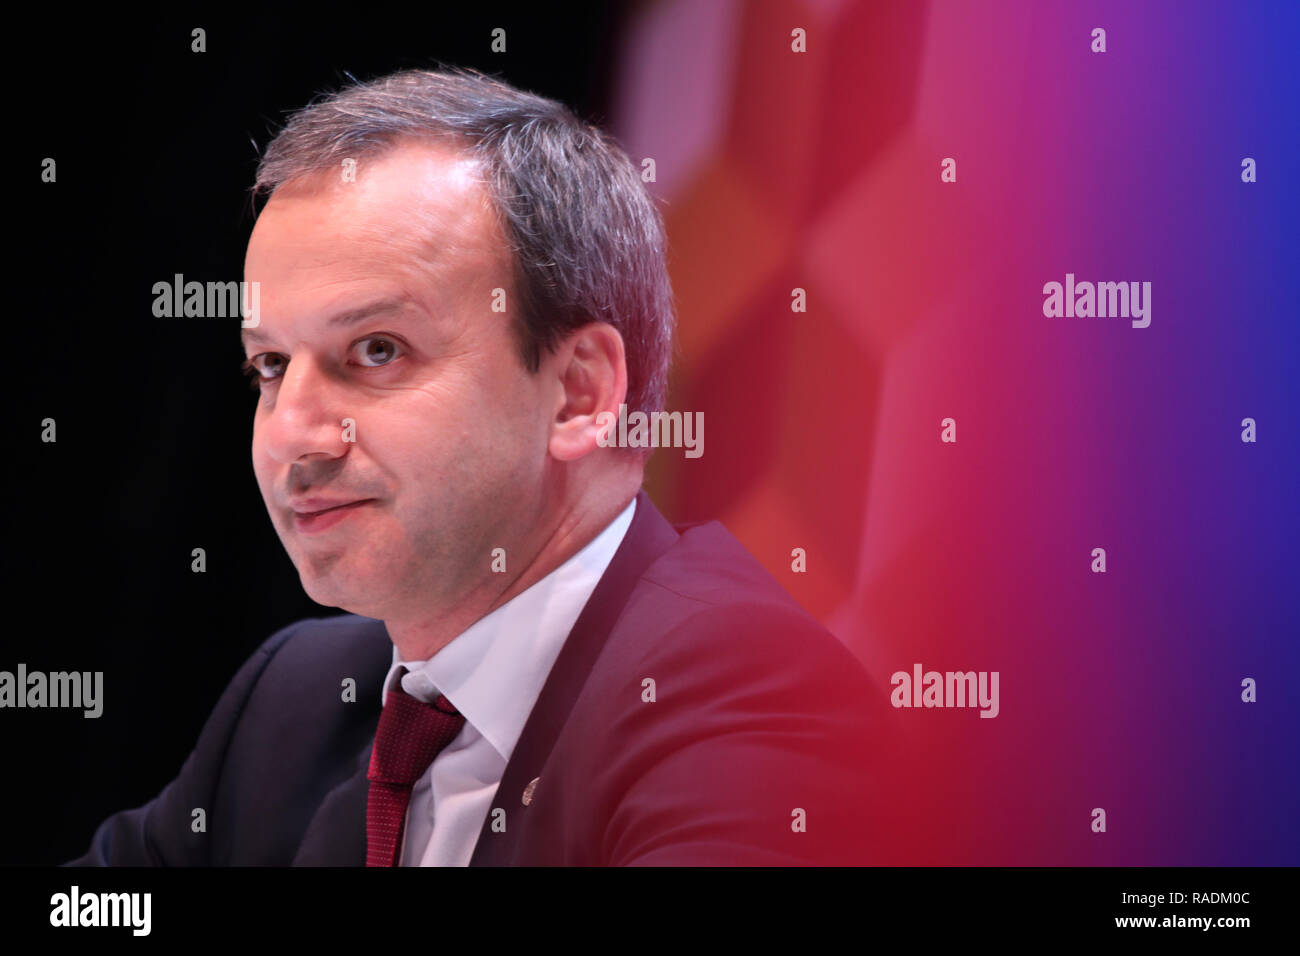 Arkady Dvorkovich High Resolution Stock Photography and Images - Alamy